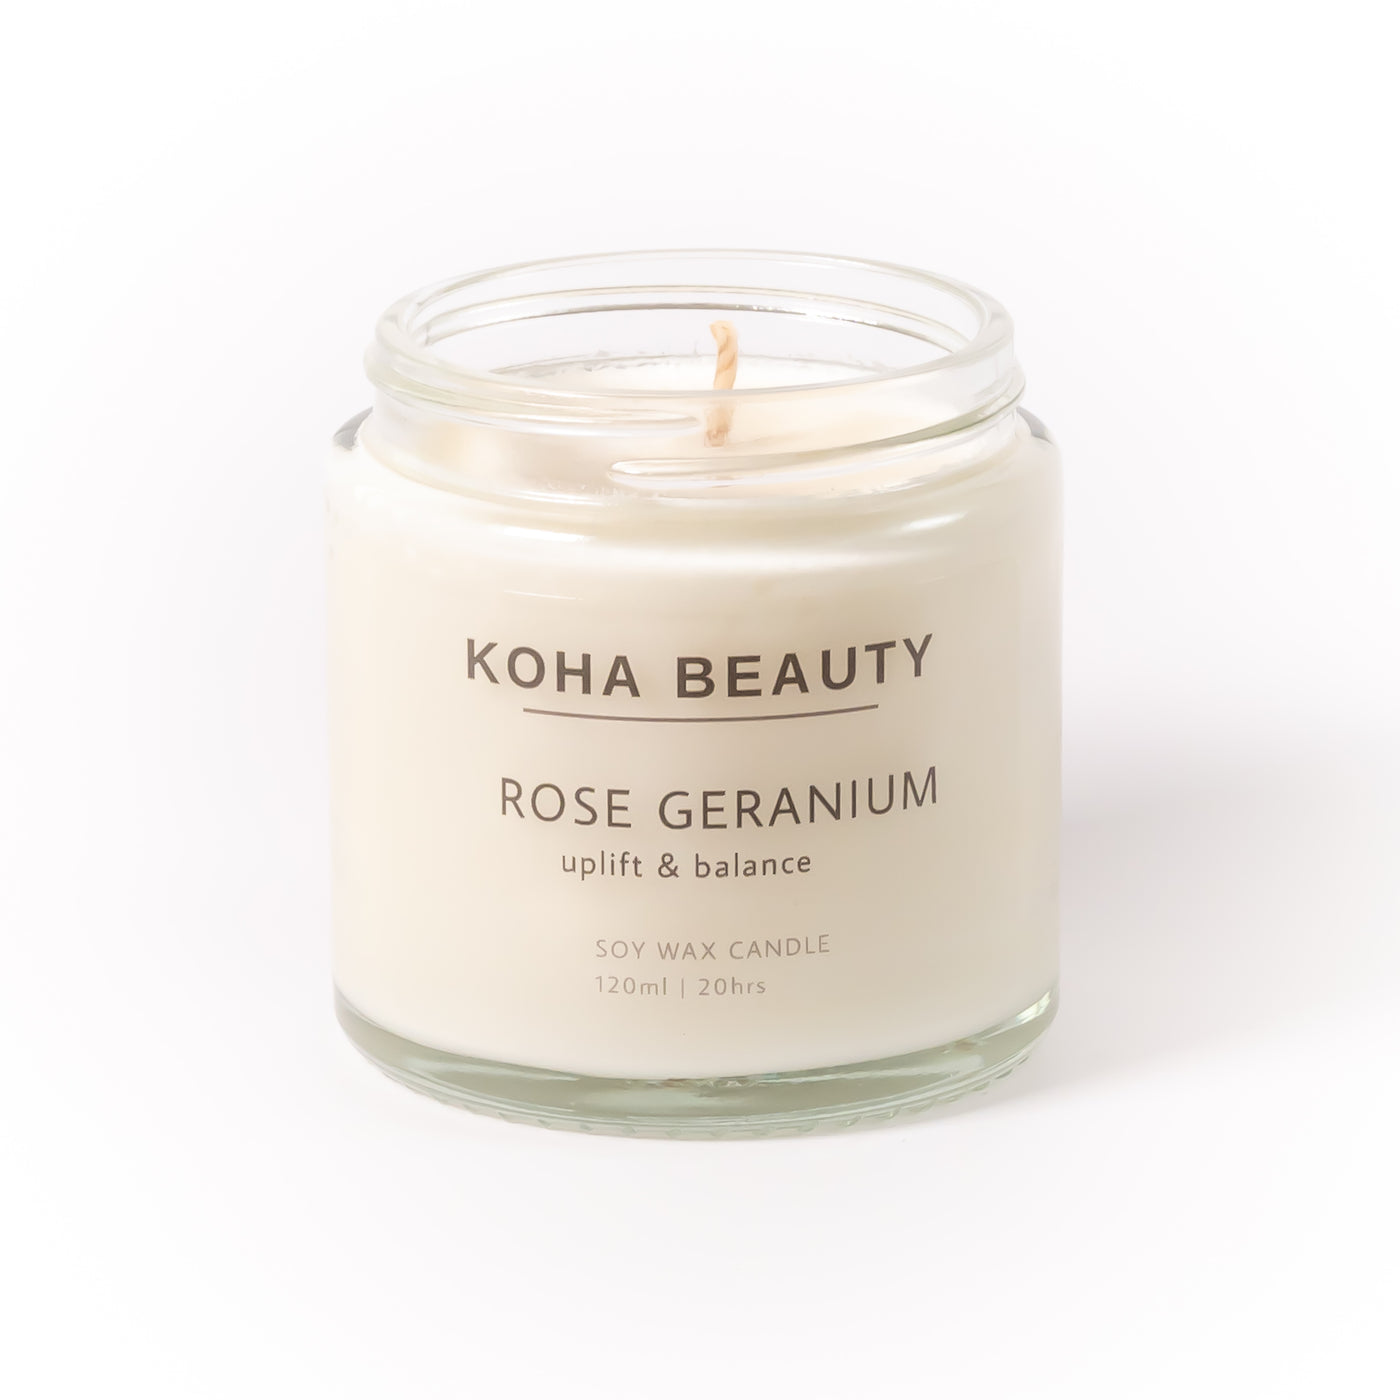 Buy Online Premium Quality Natural and Organic Rose Geranium Soy wax candle | Buy Cruelty Free Cosmetics & Vegan Beauty Products Online - KOHA Beauty